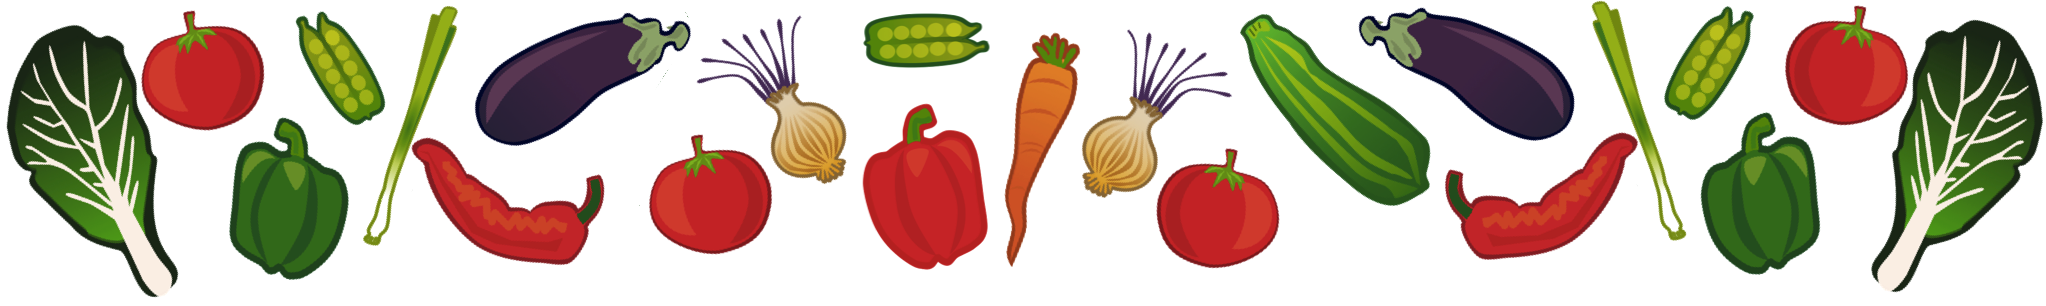 food clipart agriculture